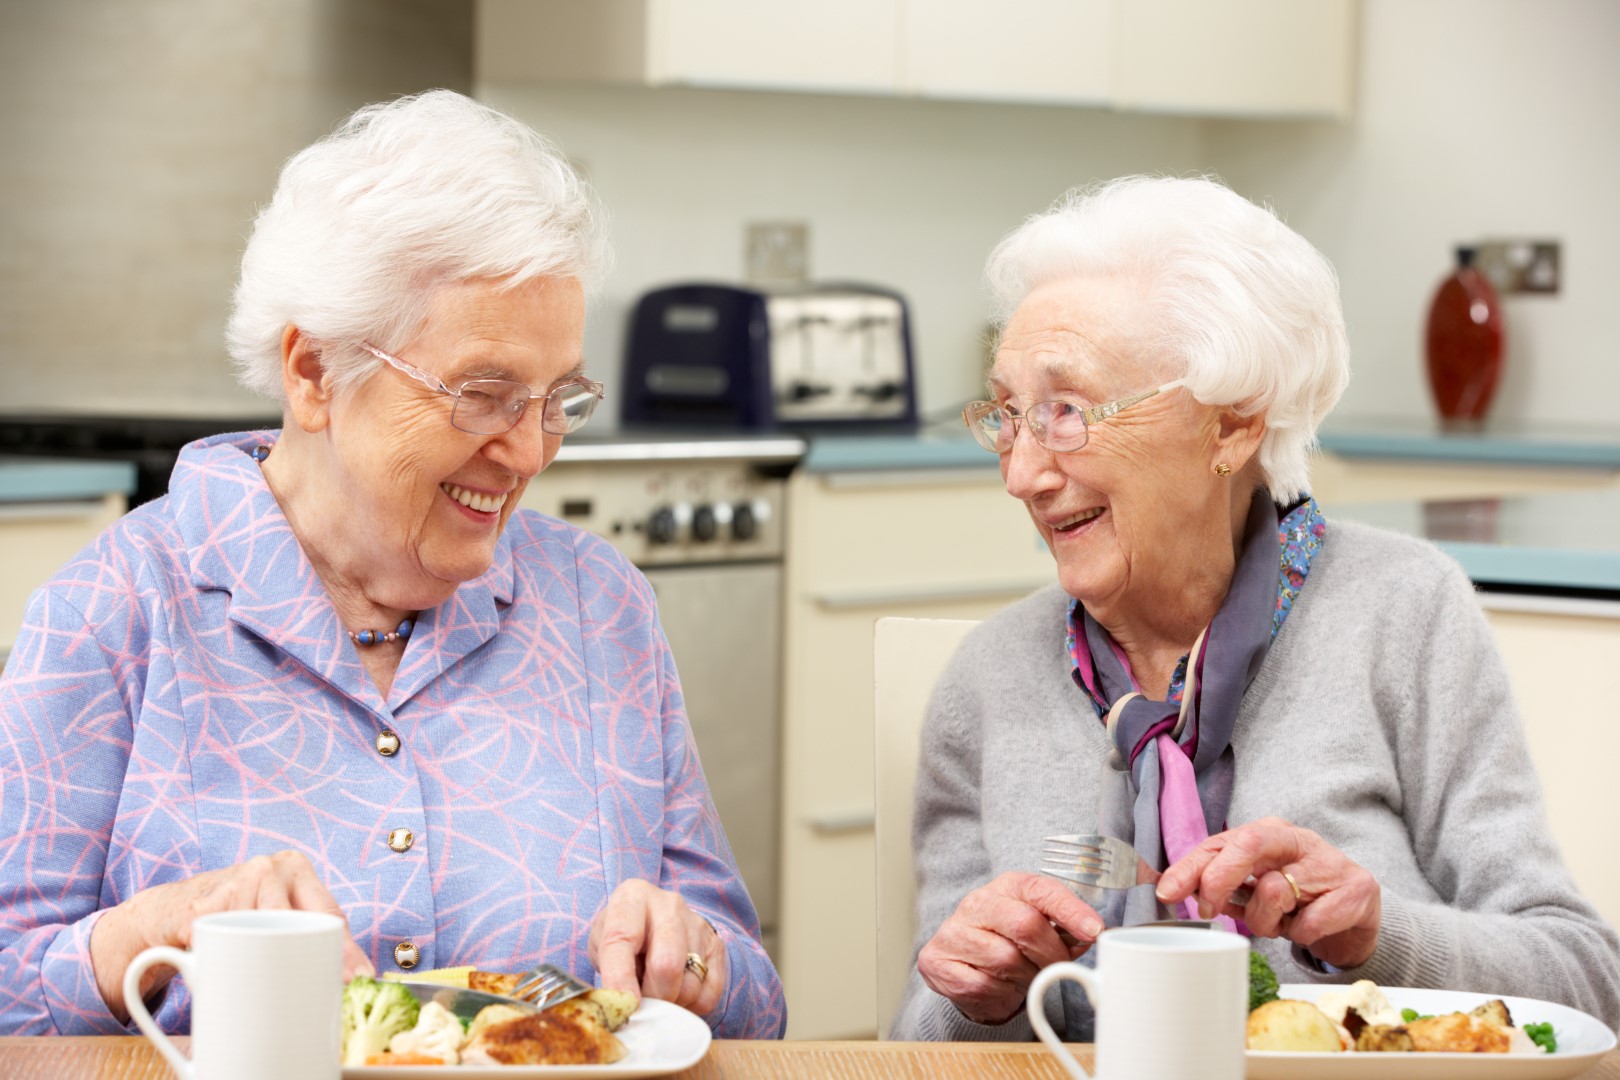 How Assisted Living Can Improve Quality of Life